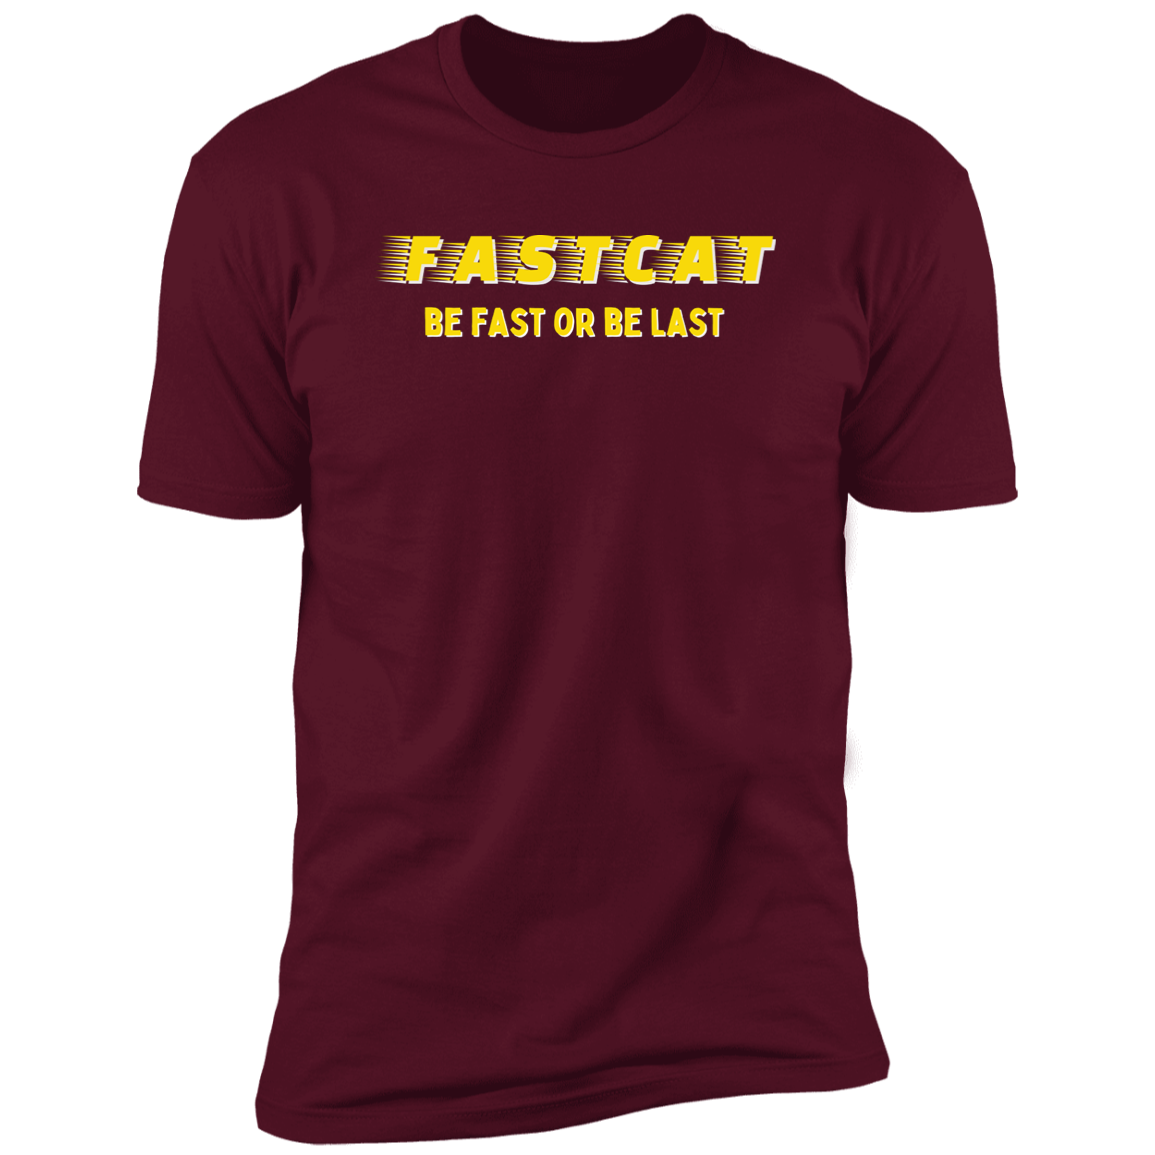 FastCAT Be Fast or Be Last Dog Sport T-shirt, FastCAT Shirt for humans, in maroon